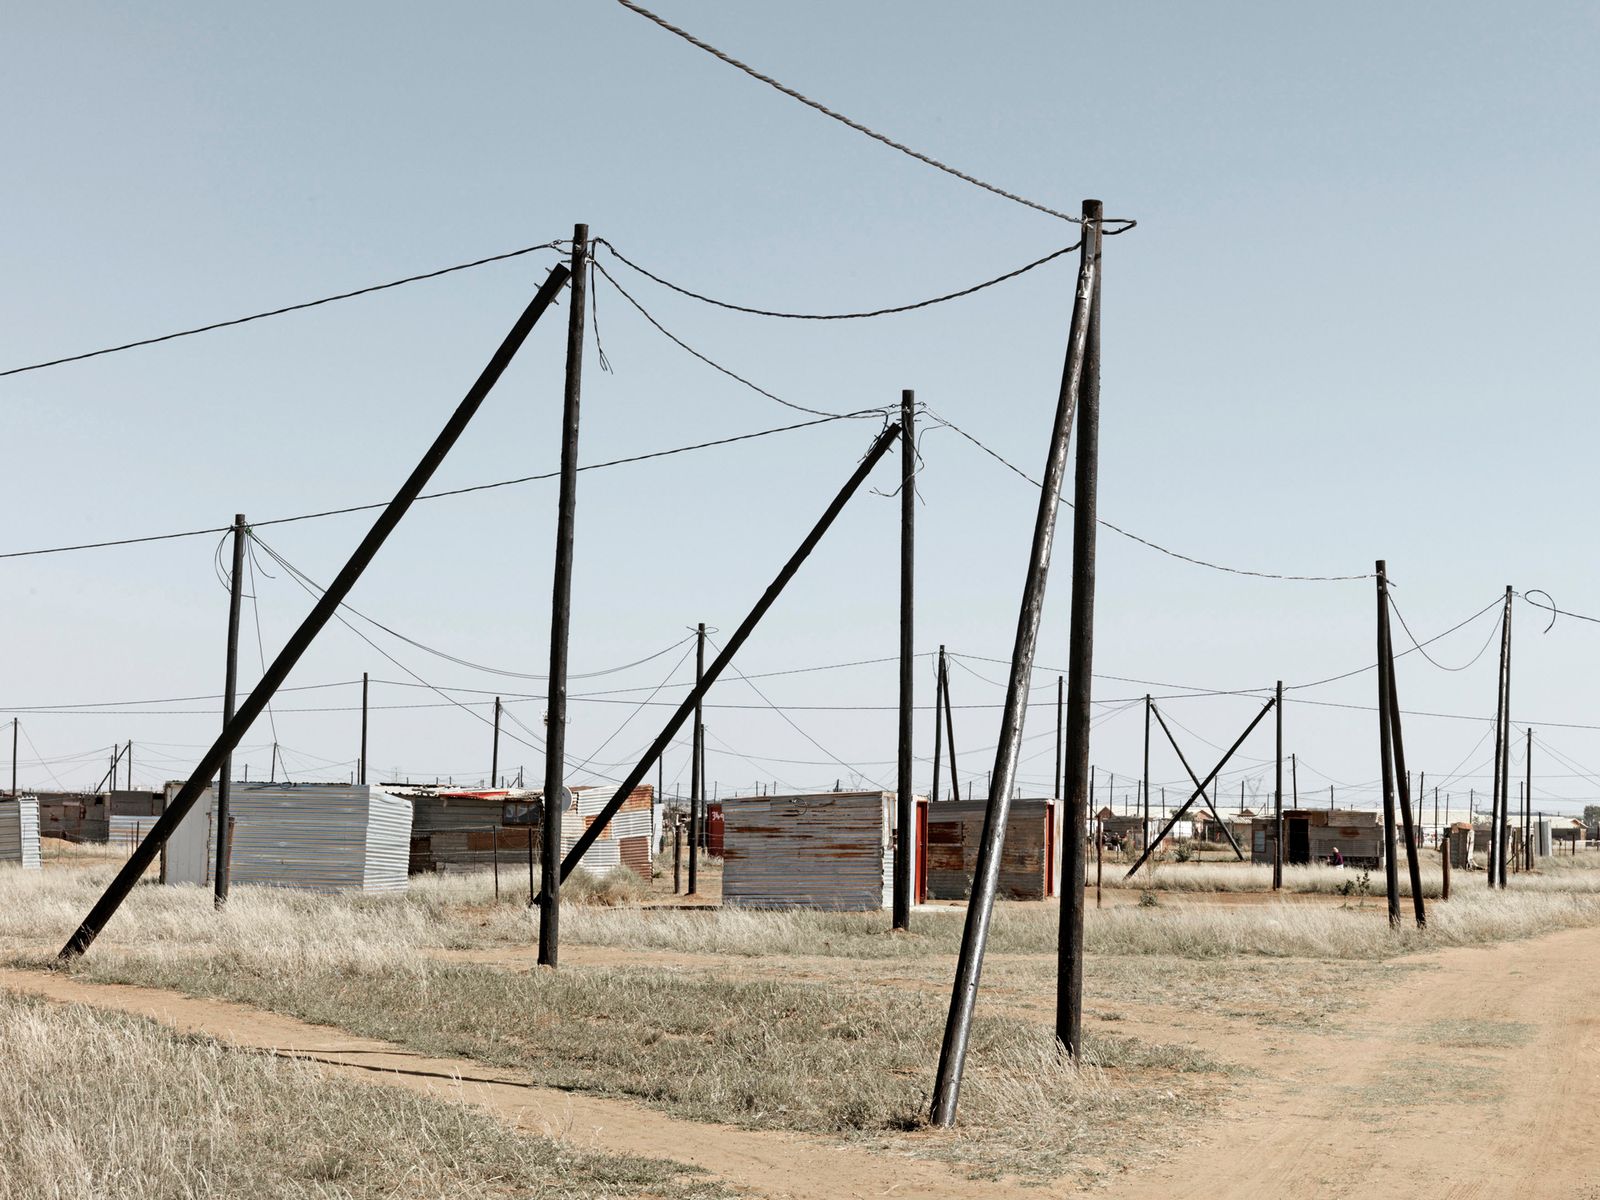 © Graeme Williams - Delareyville, South Africa. 2013. New shack dwellings receive electricity from the state.